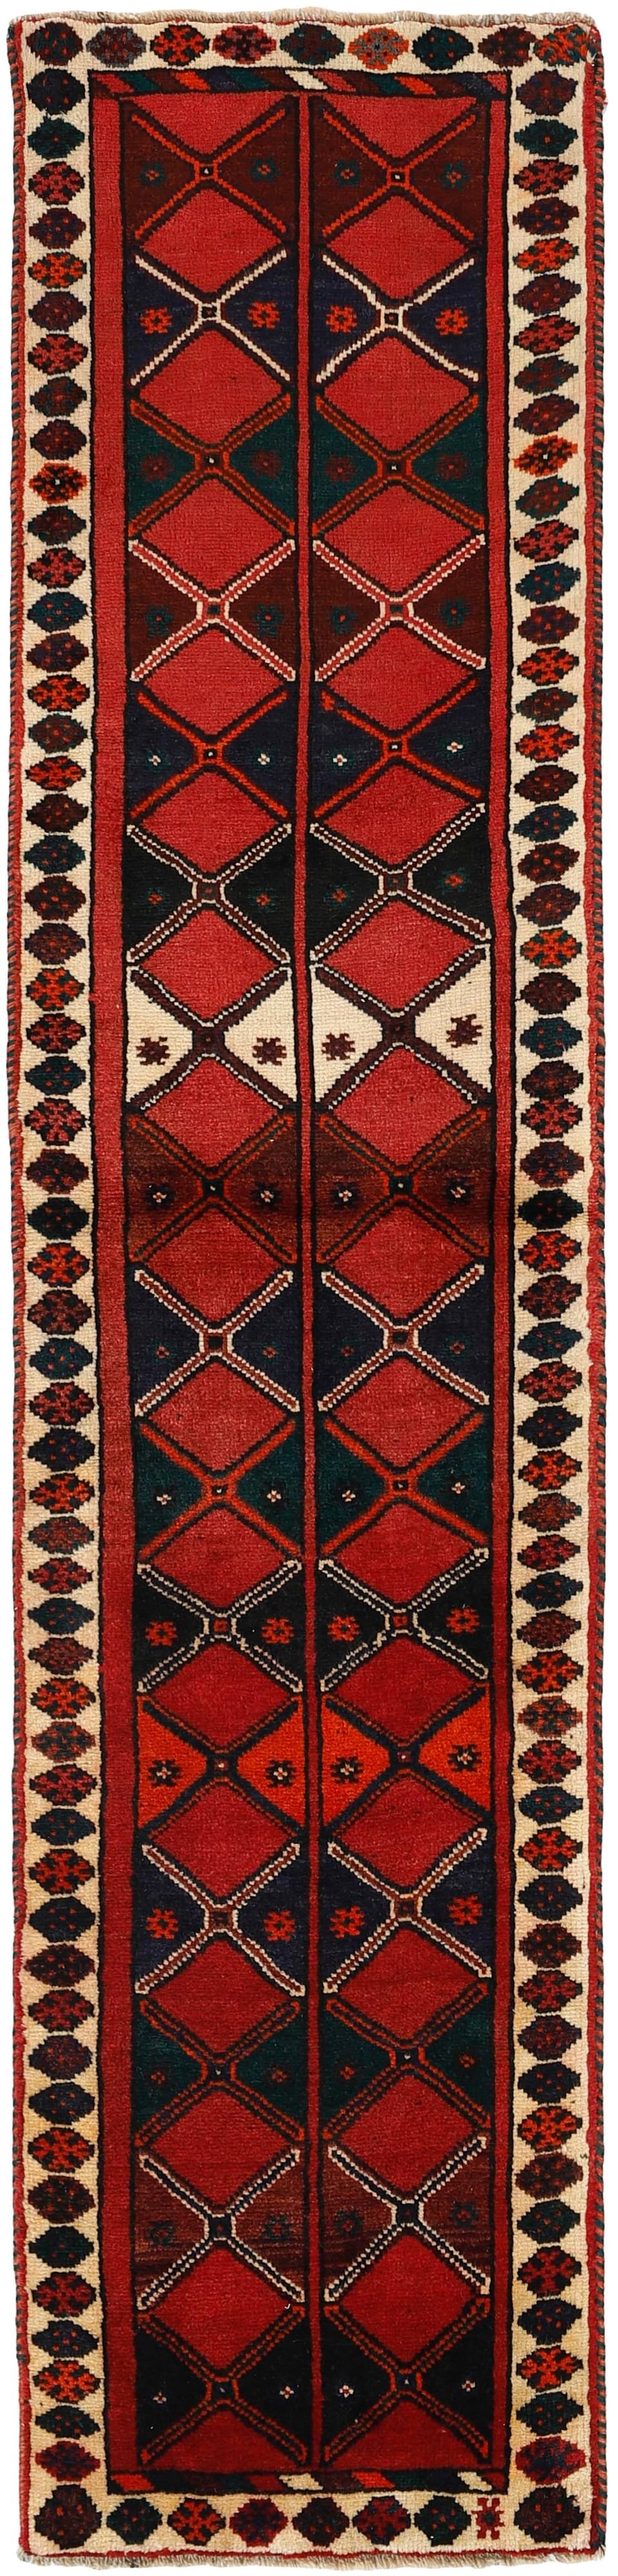 Authentic persian runner with a traditional tribal geometric pattern in red, black and beige